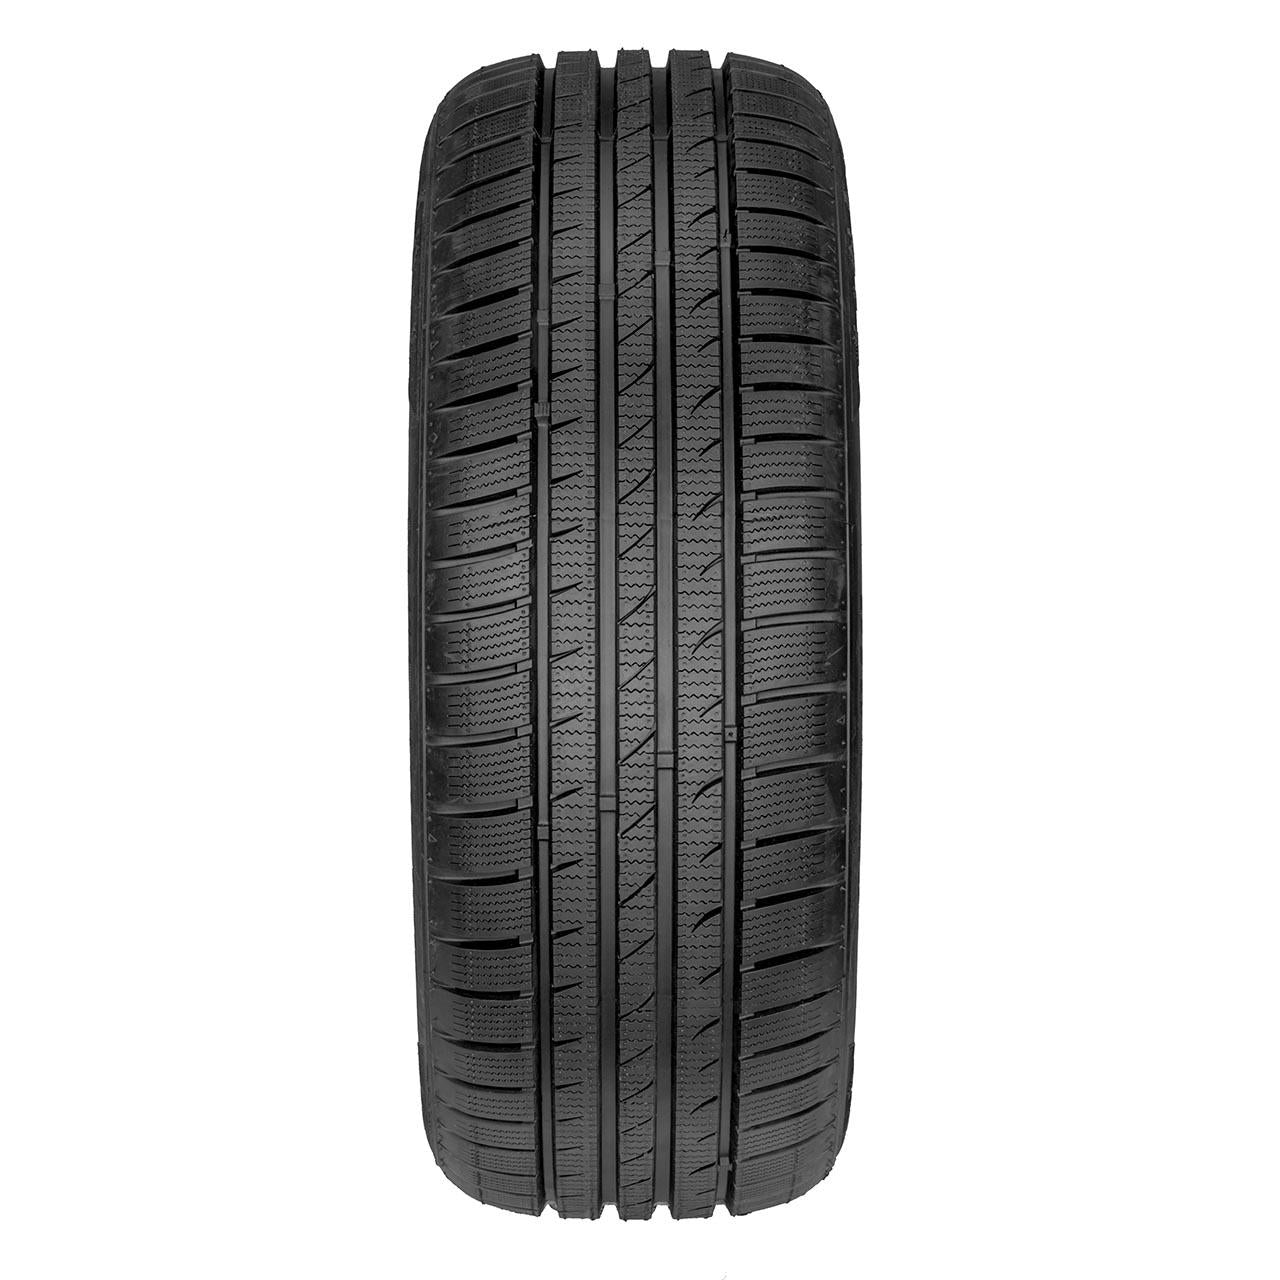 FORTUNA GOWIN UHP 185/55 R15 82H  TL M+S 3PMSF